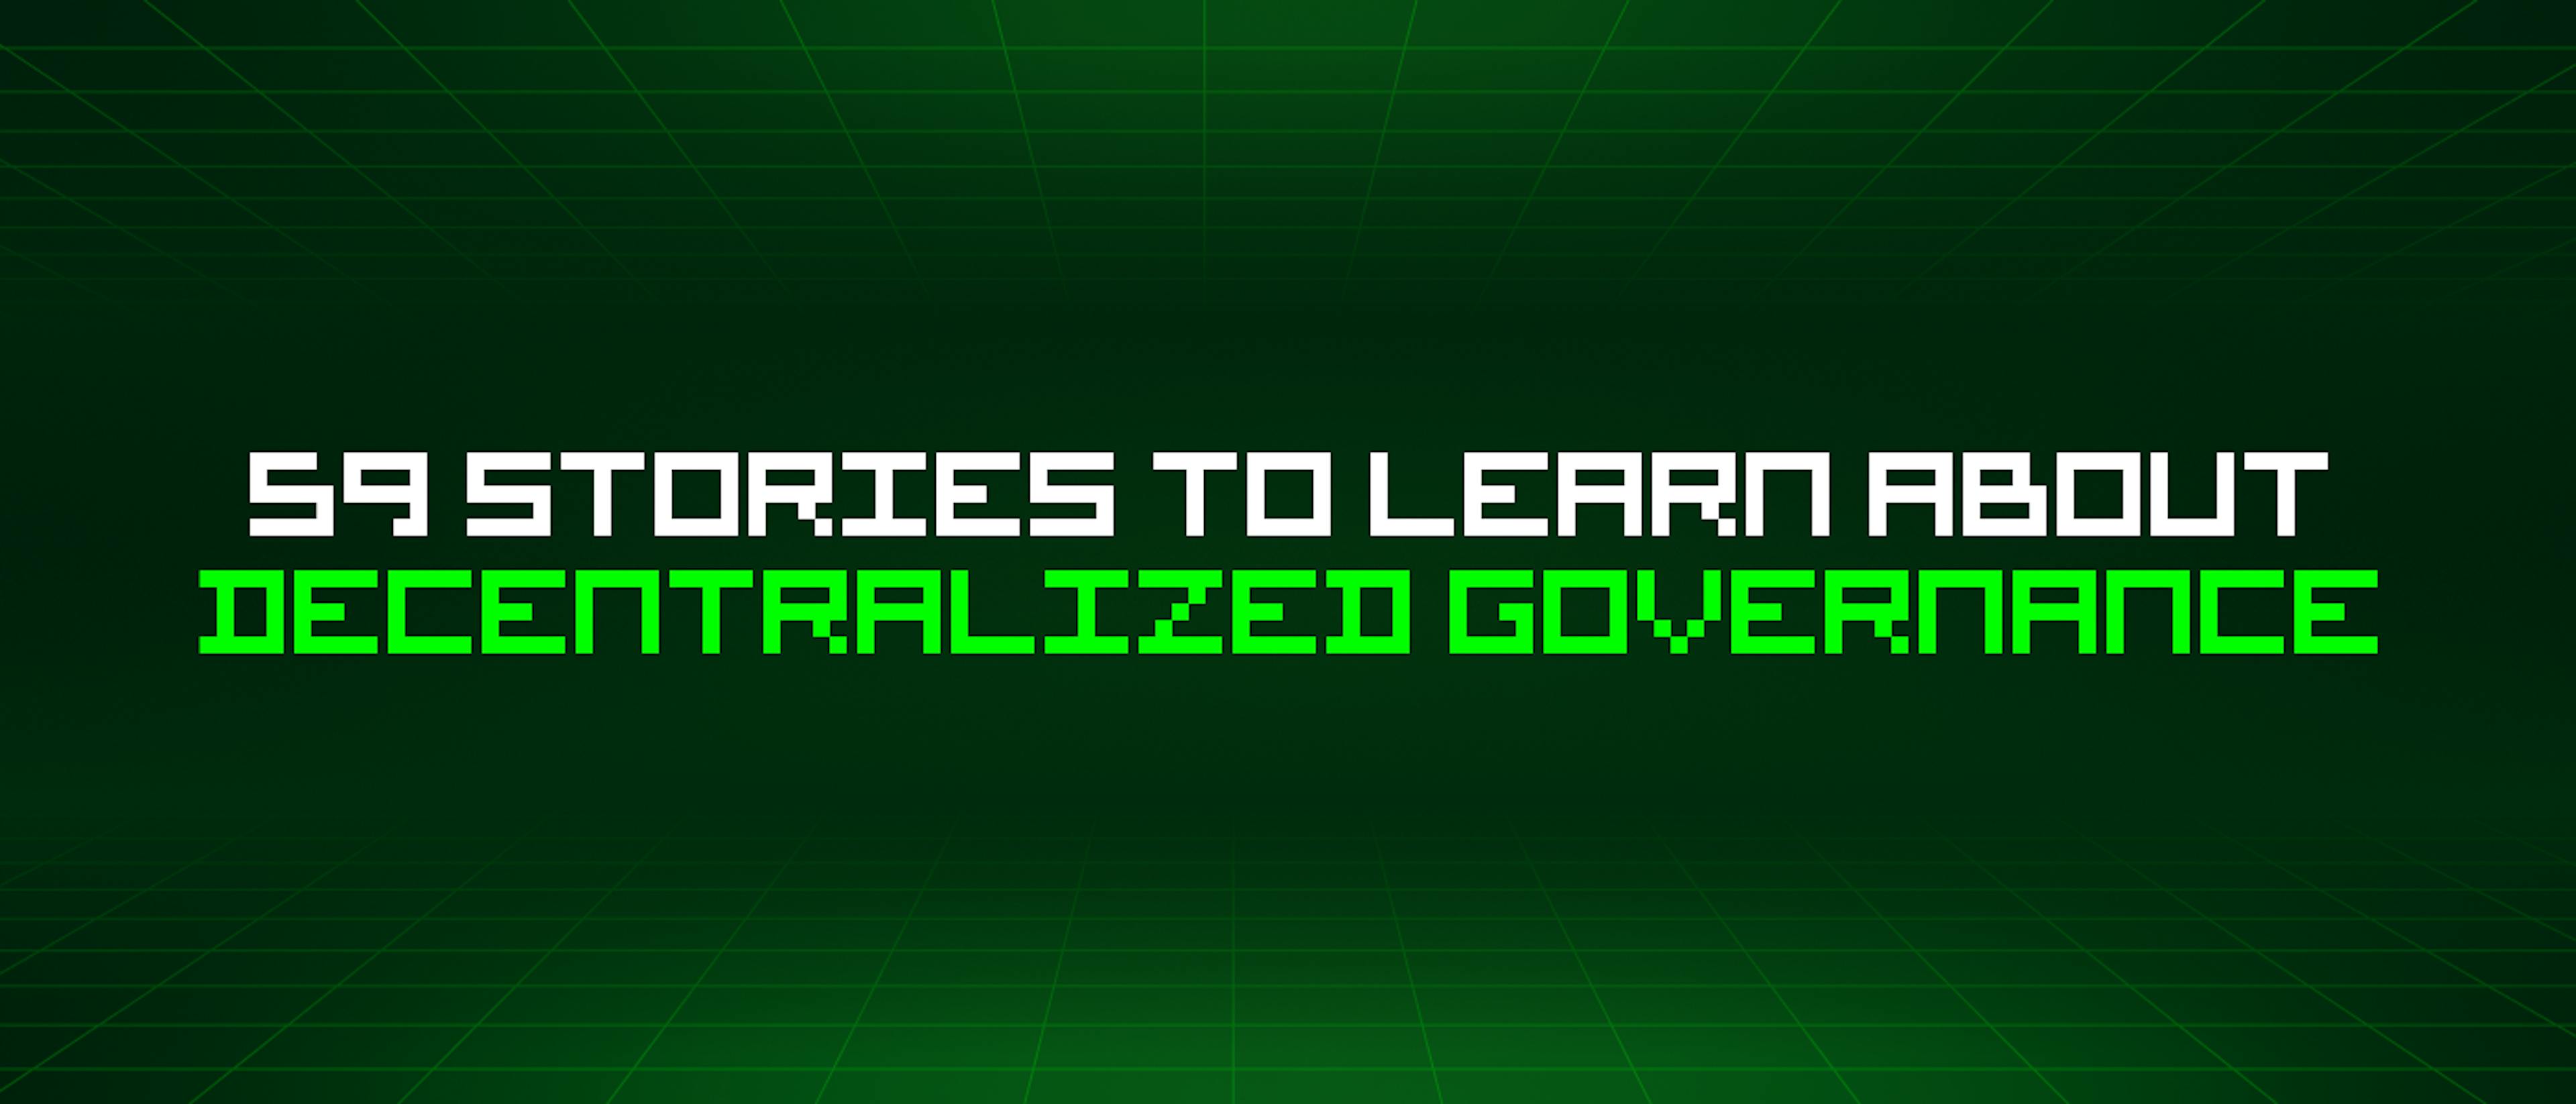 featured image - 59 Stories To Learn About Decentralized Governance